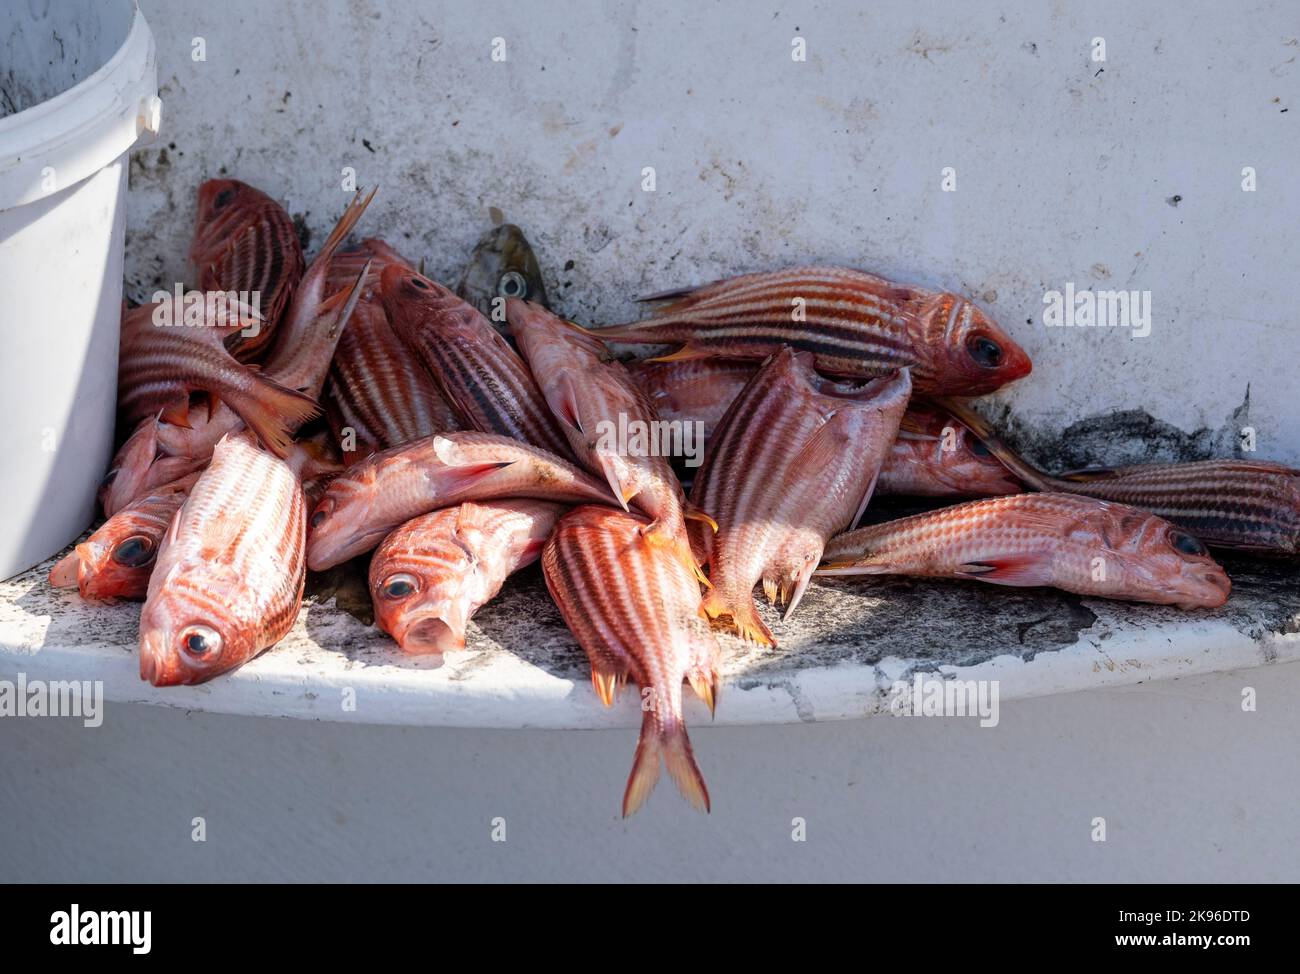 Freshly Red Striped Squirrel fish (Sargocentron rubrum) on a Fishermans boat, Agios Gorgeous harbour, Cyprus. Stock Photo